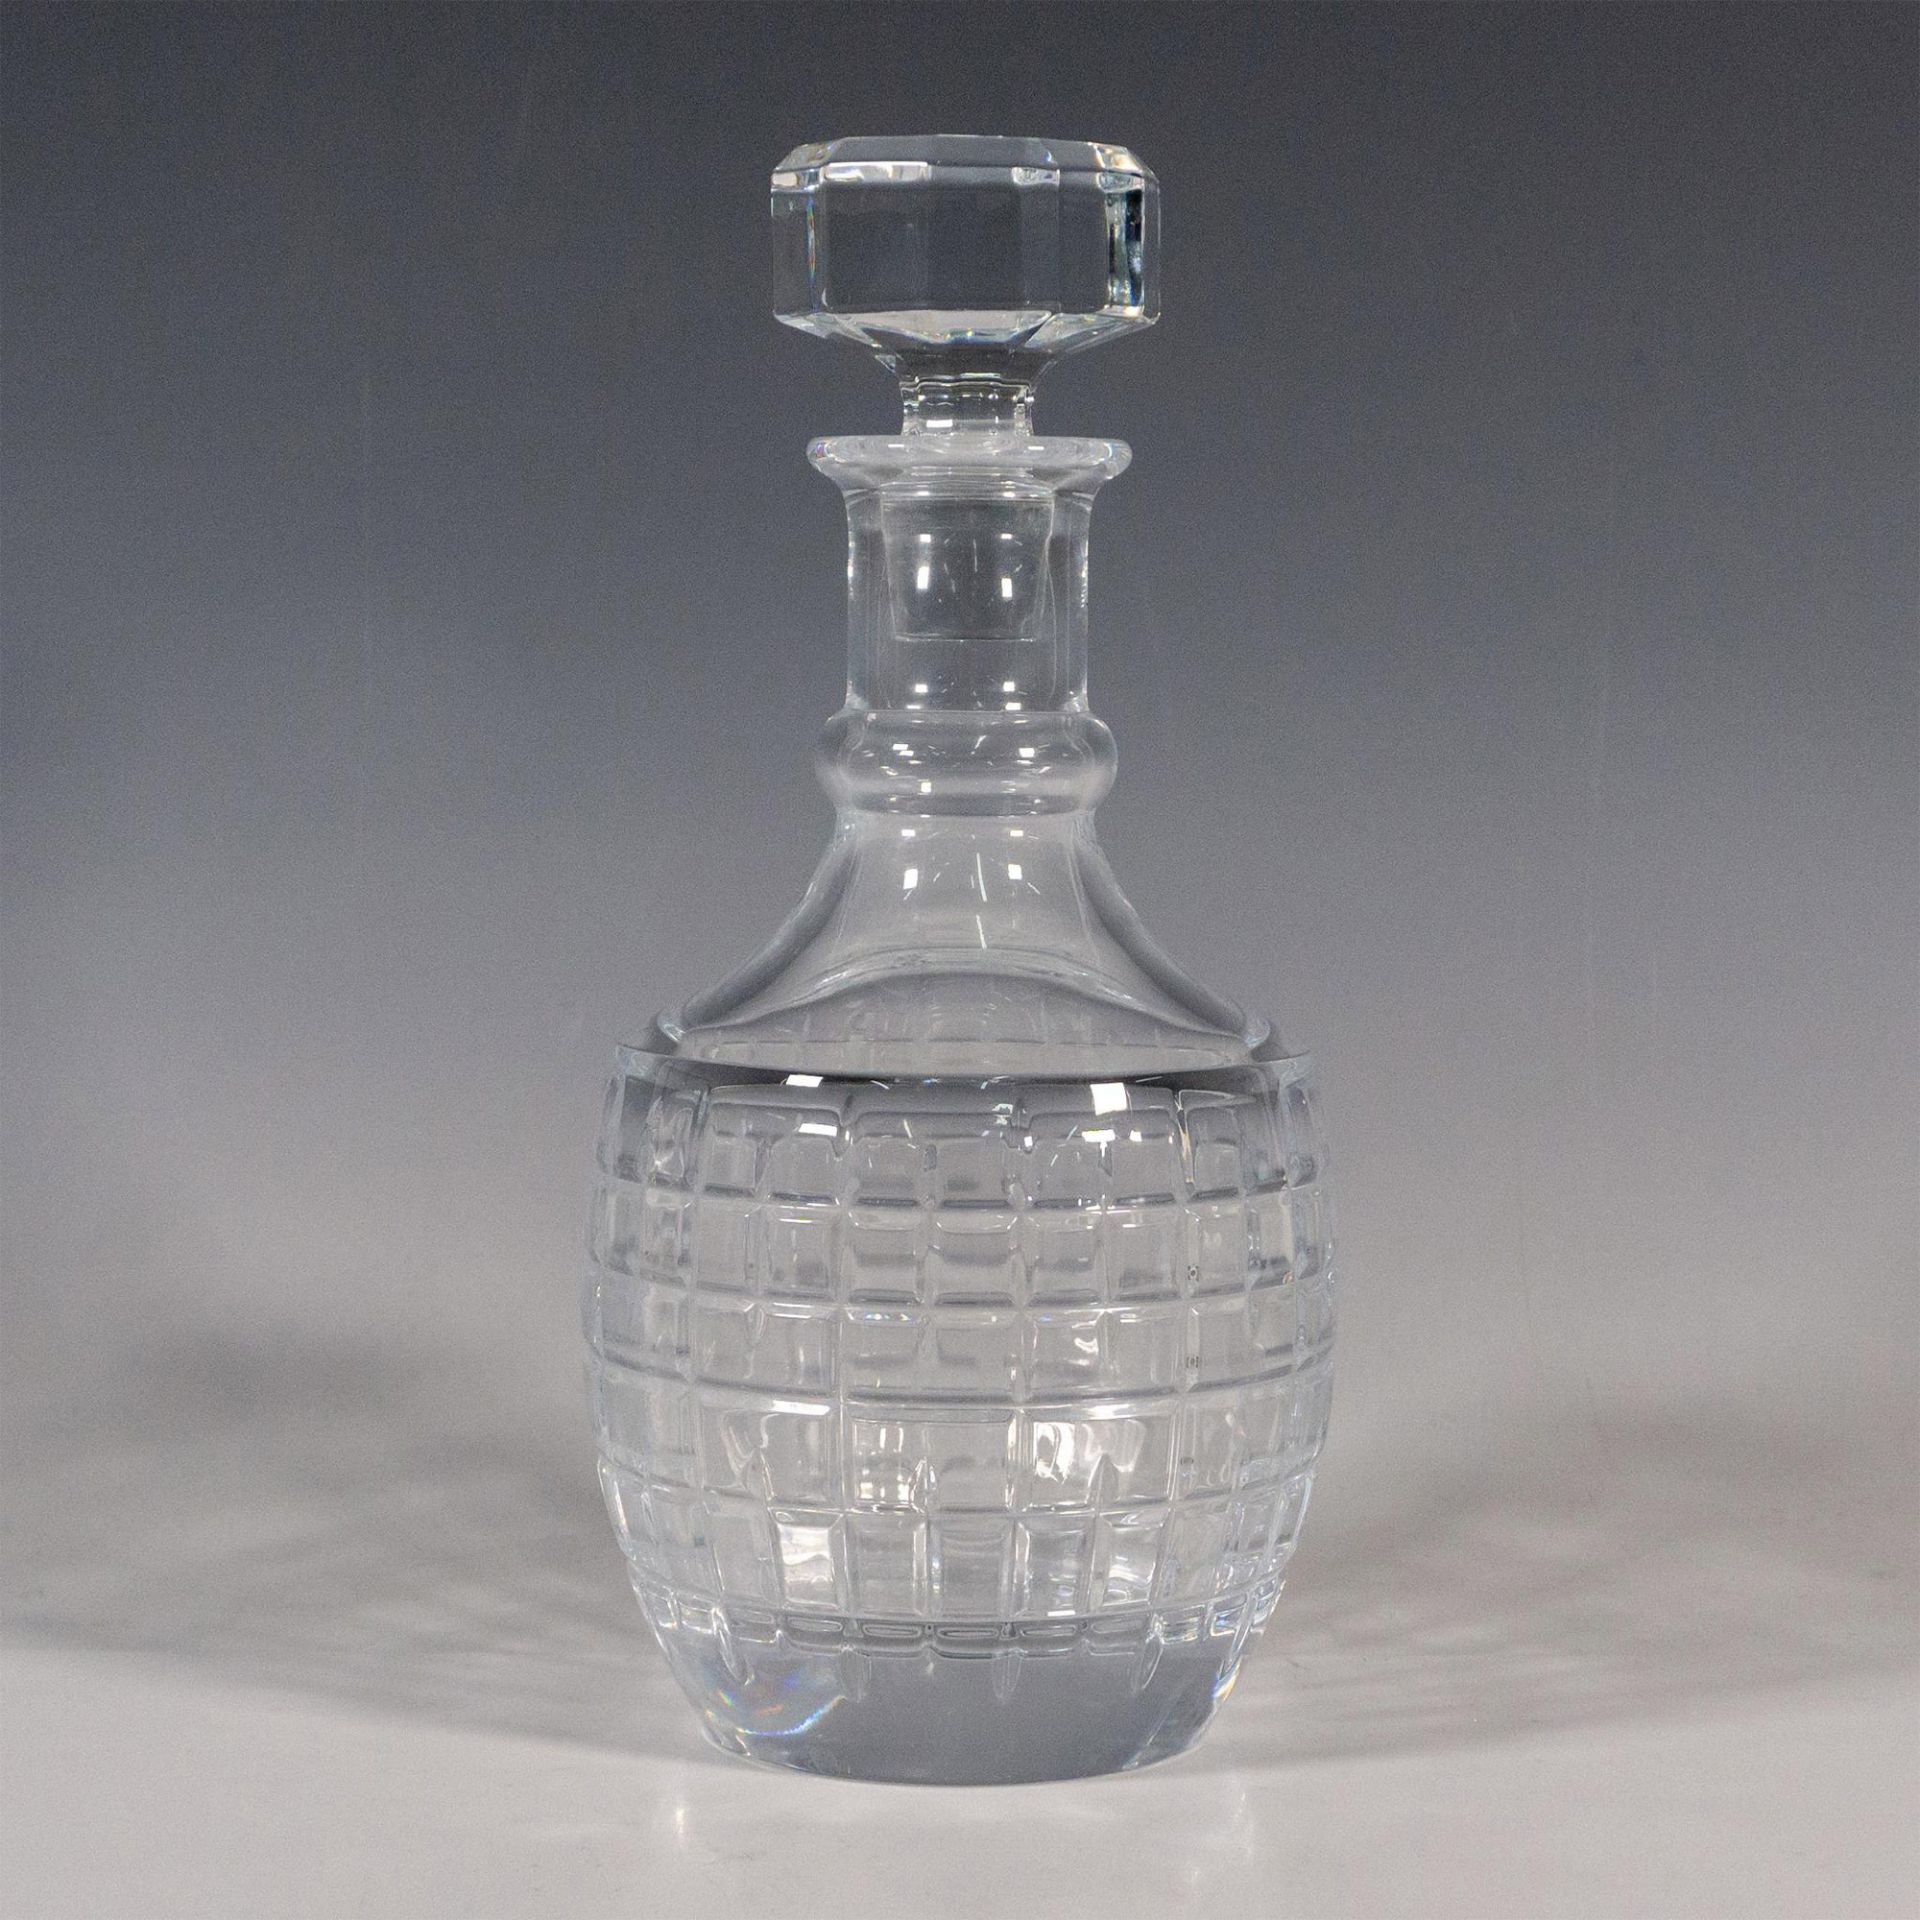 Ralph Lauren Crystal Decanter with Stopper, Cocktail Party - Image 3 of 5